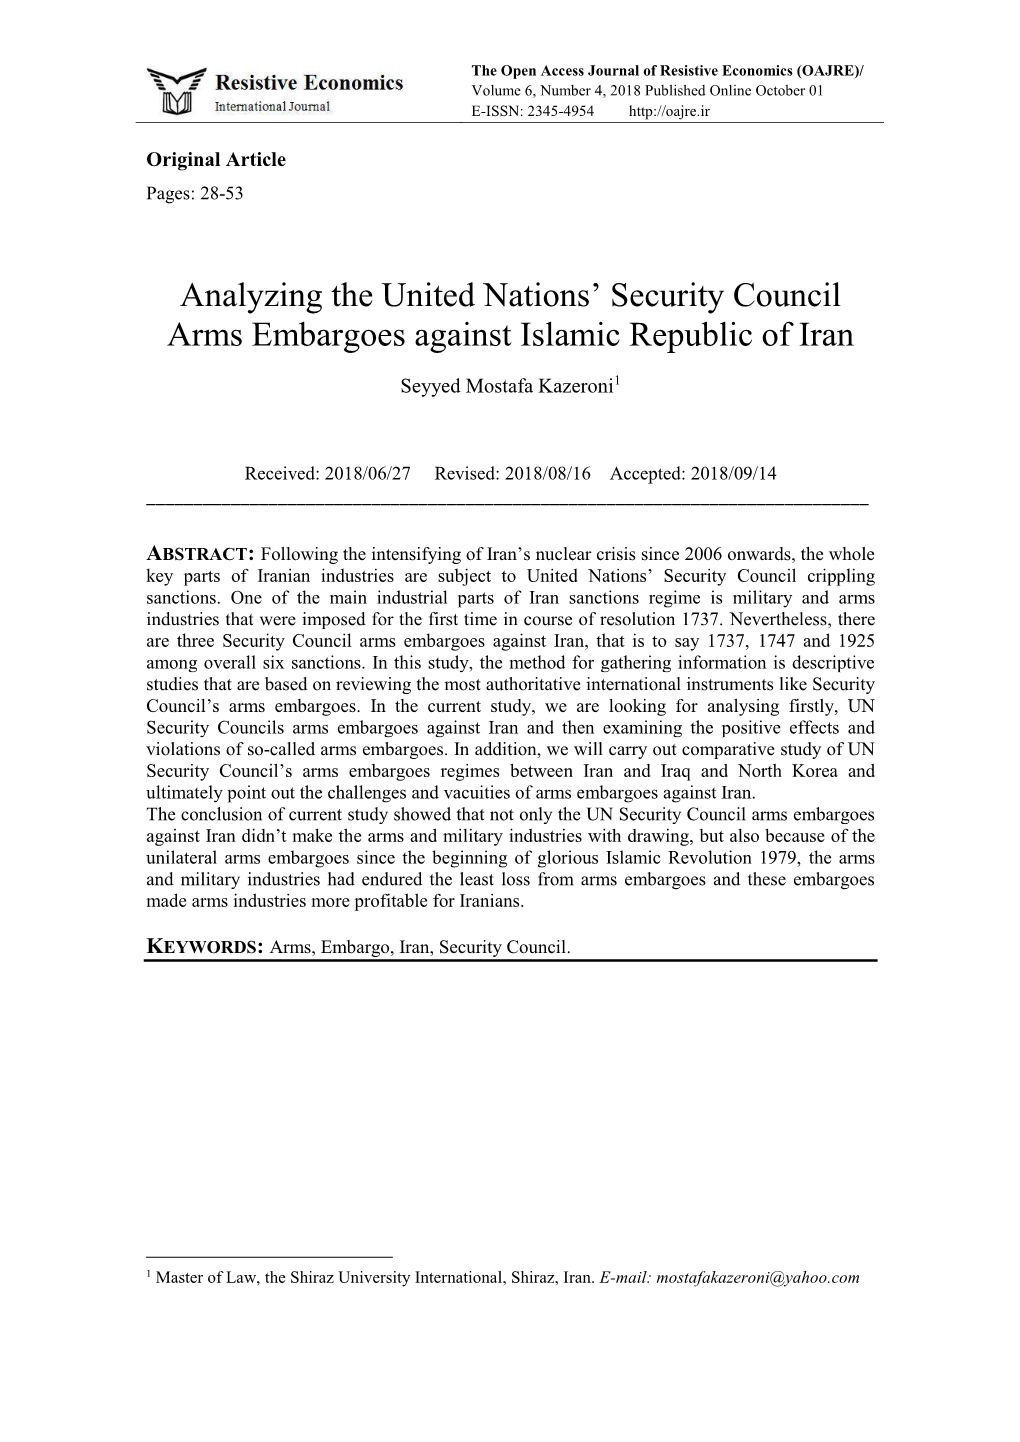 Analyzing the United Nations' Security Council Arms Embargoes Against